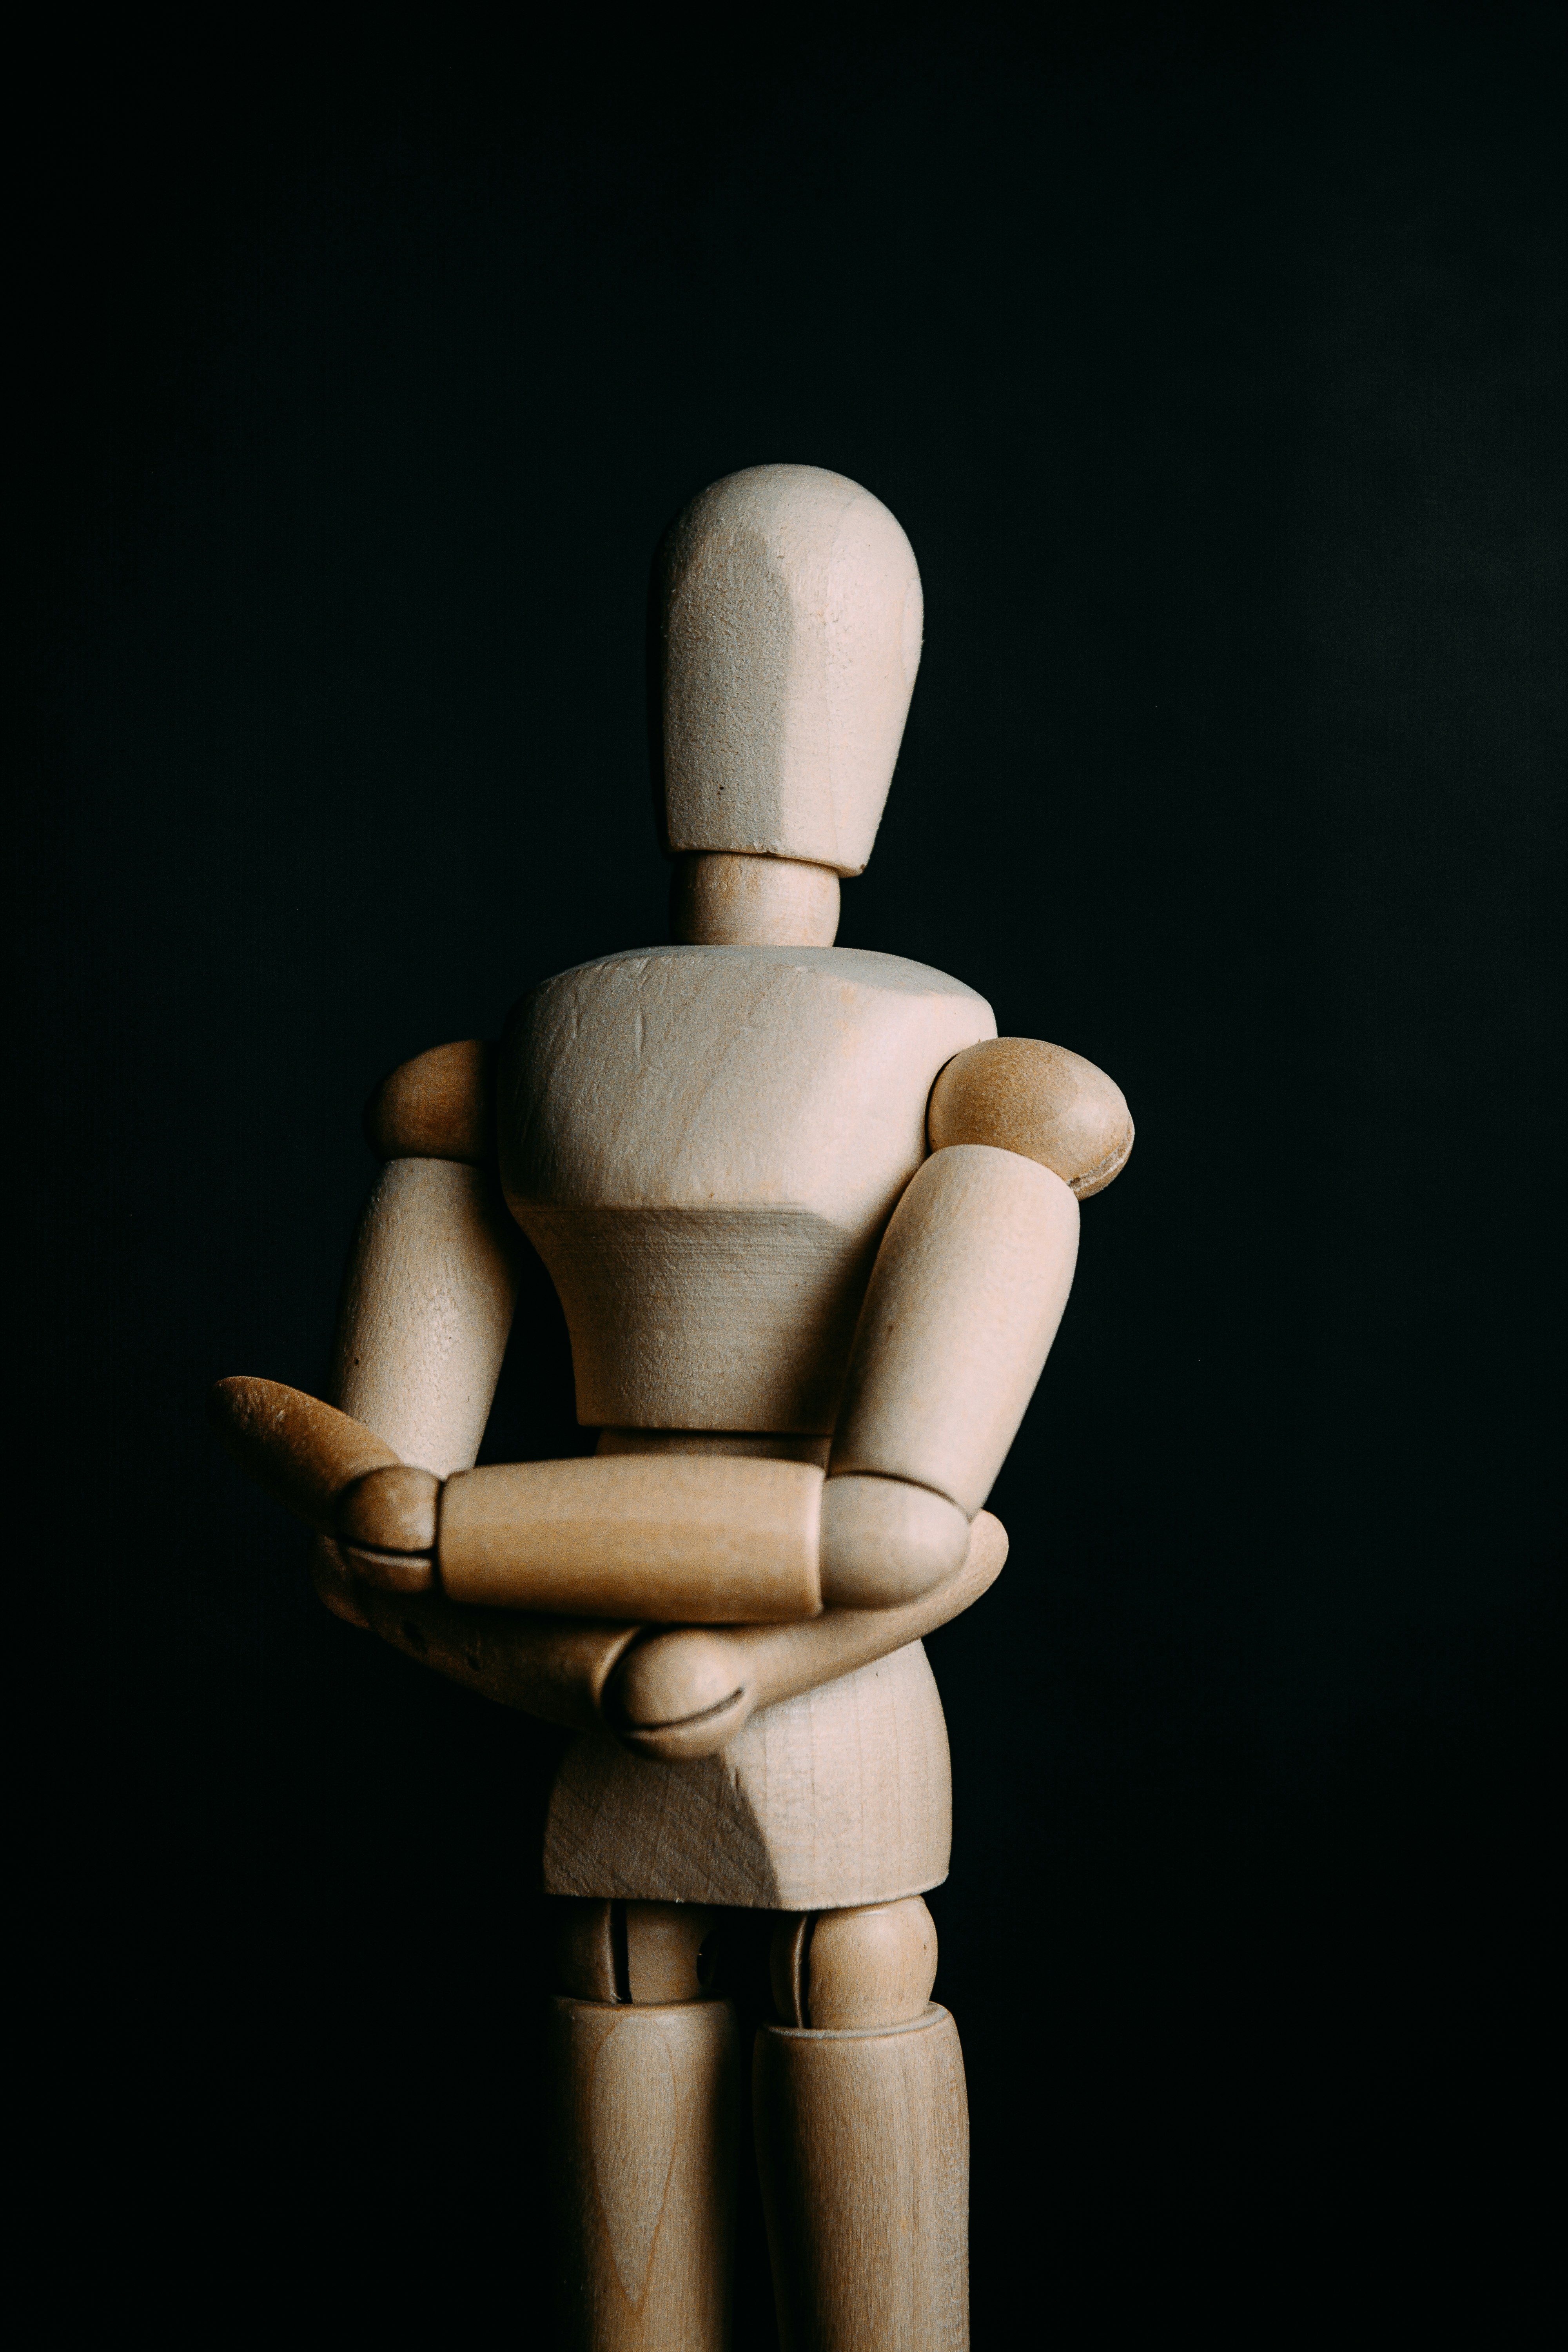 brown wooden human figurine on black surface